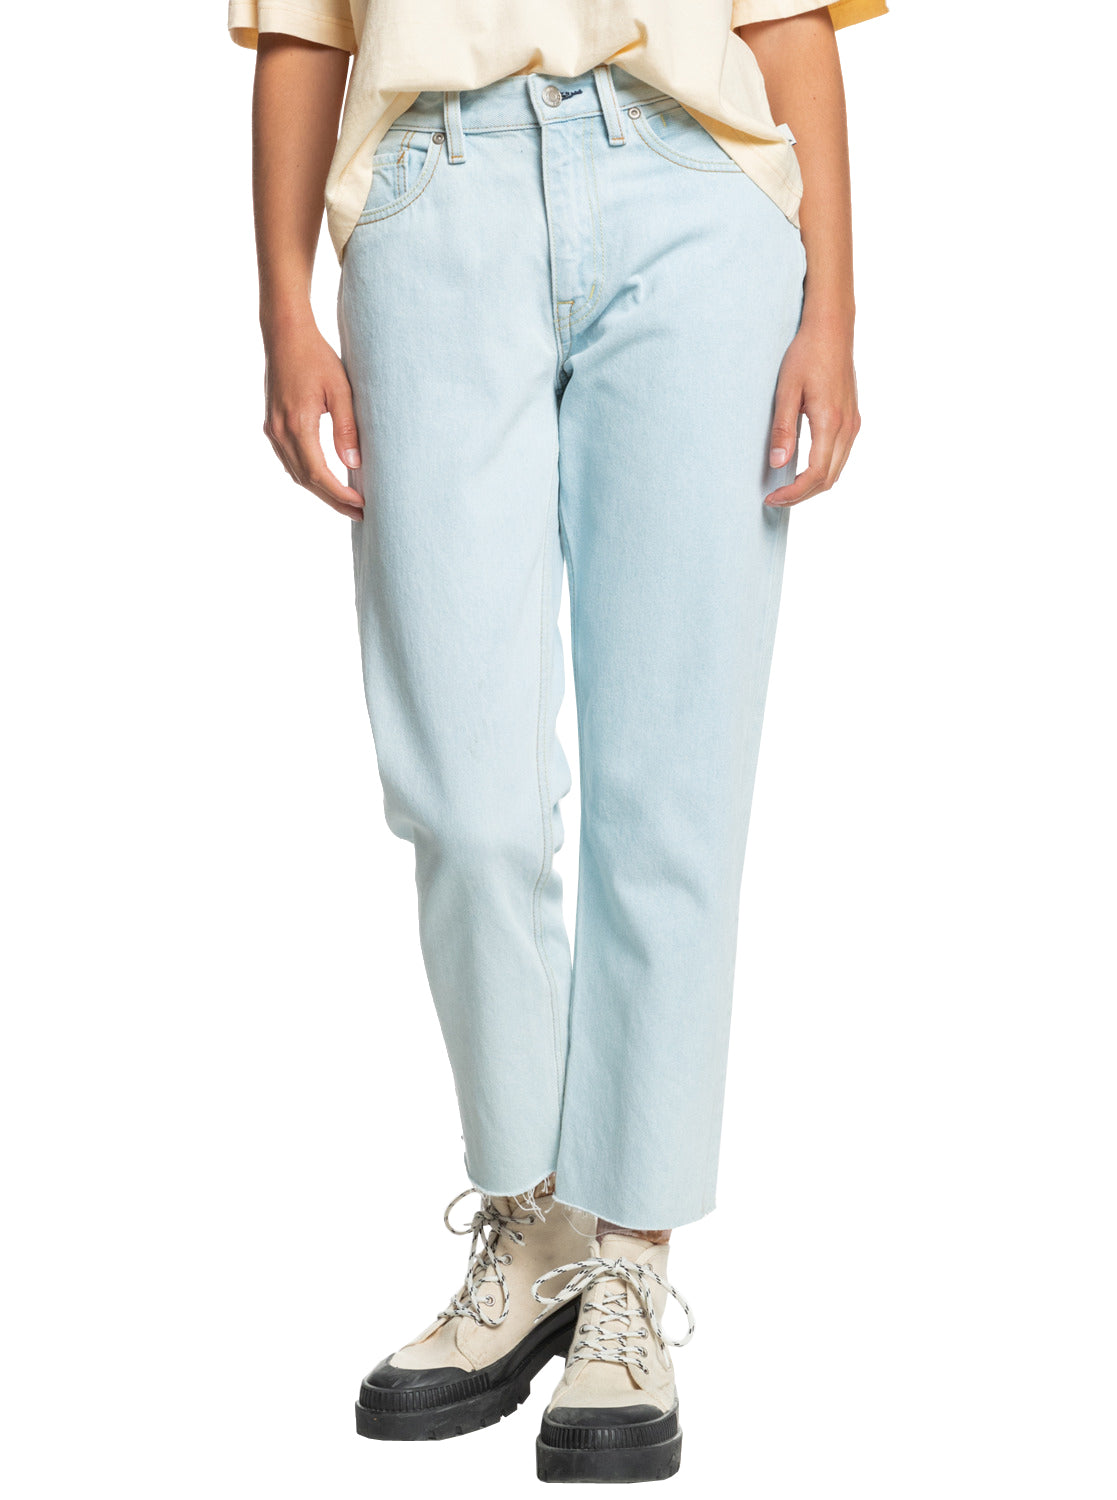 Quiksilver Women's The Up Size Pants BFMW 30